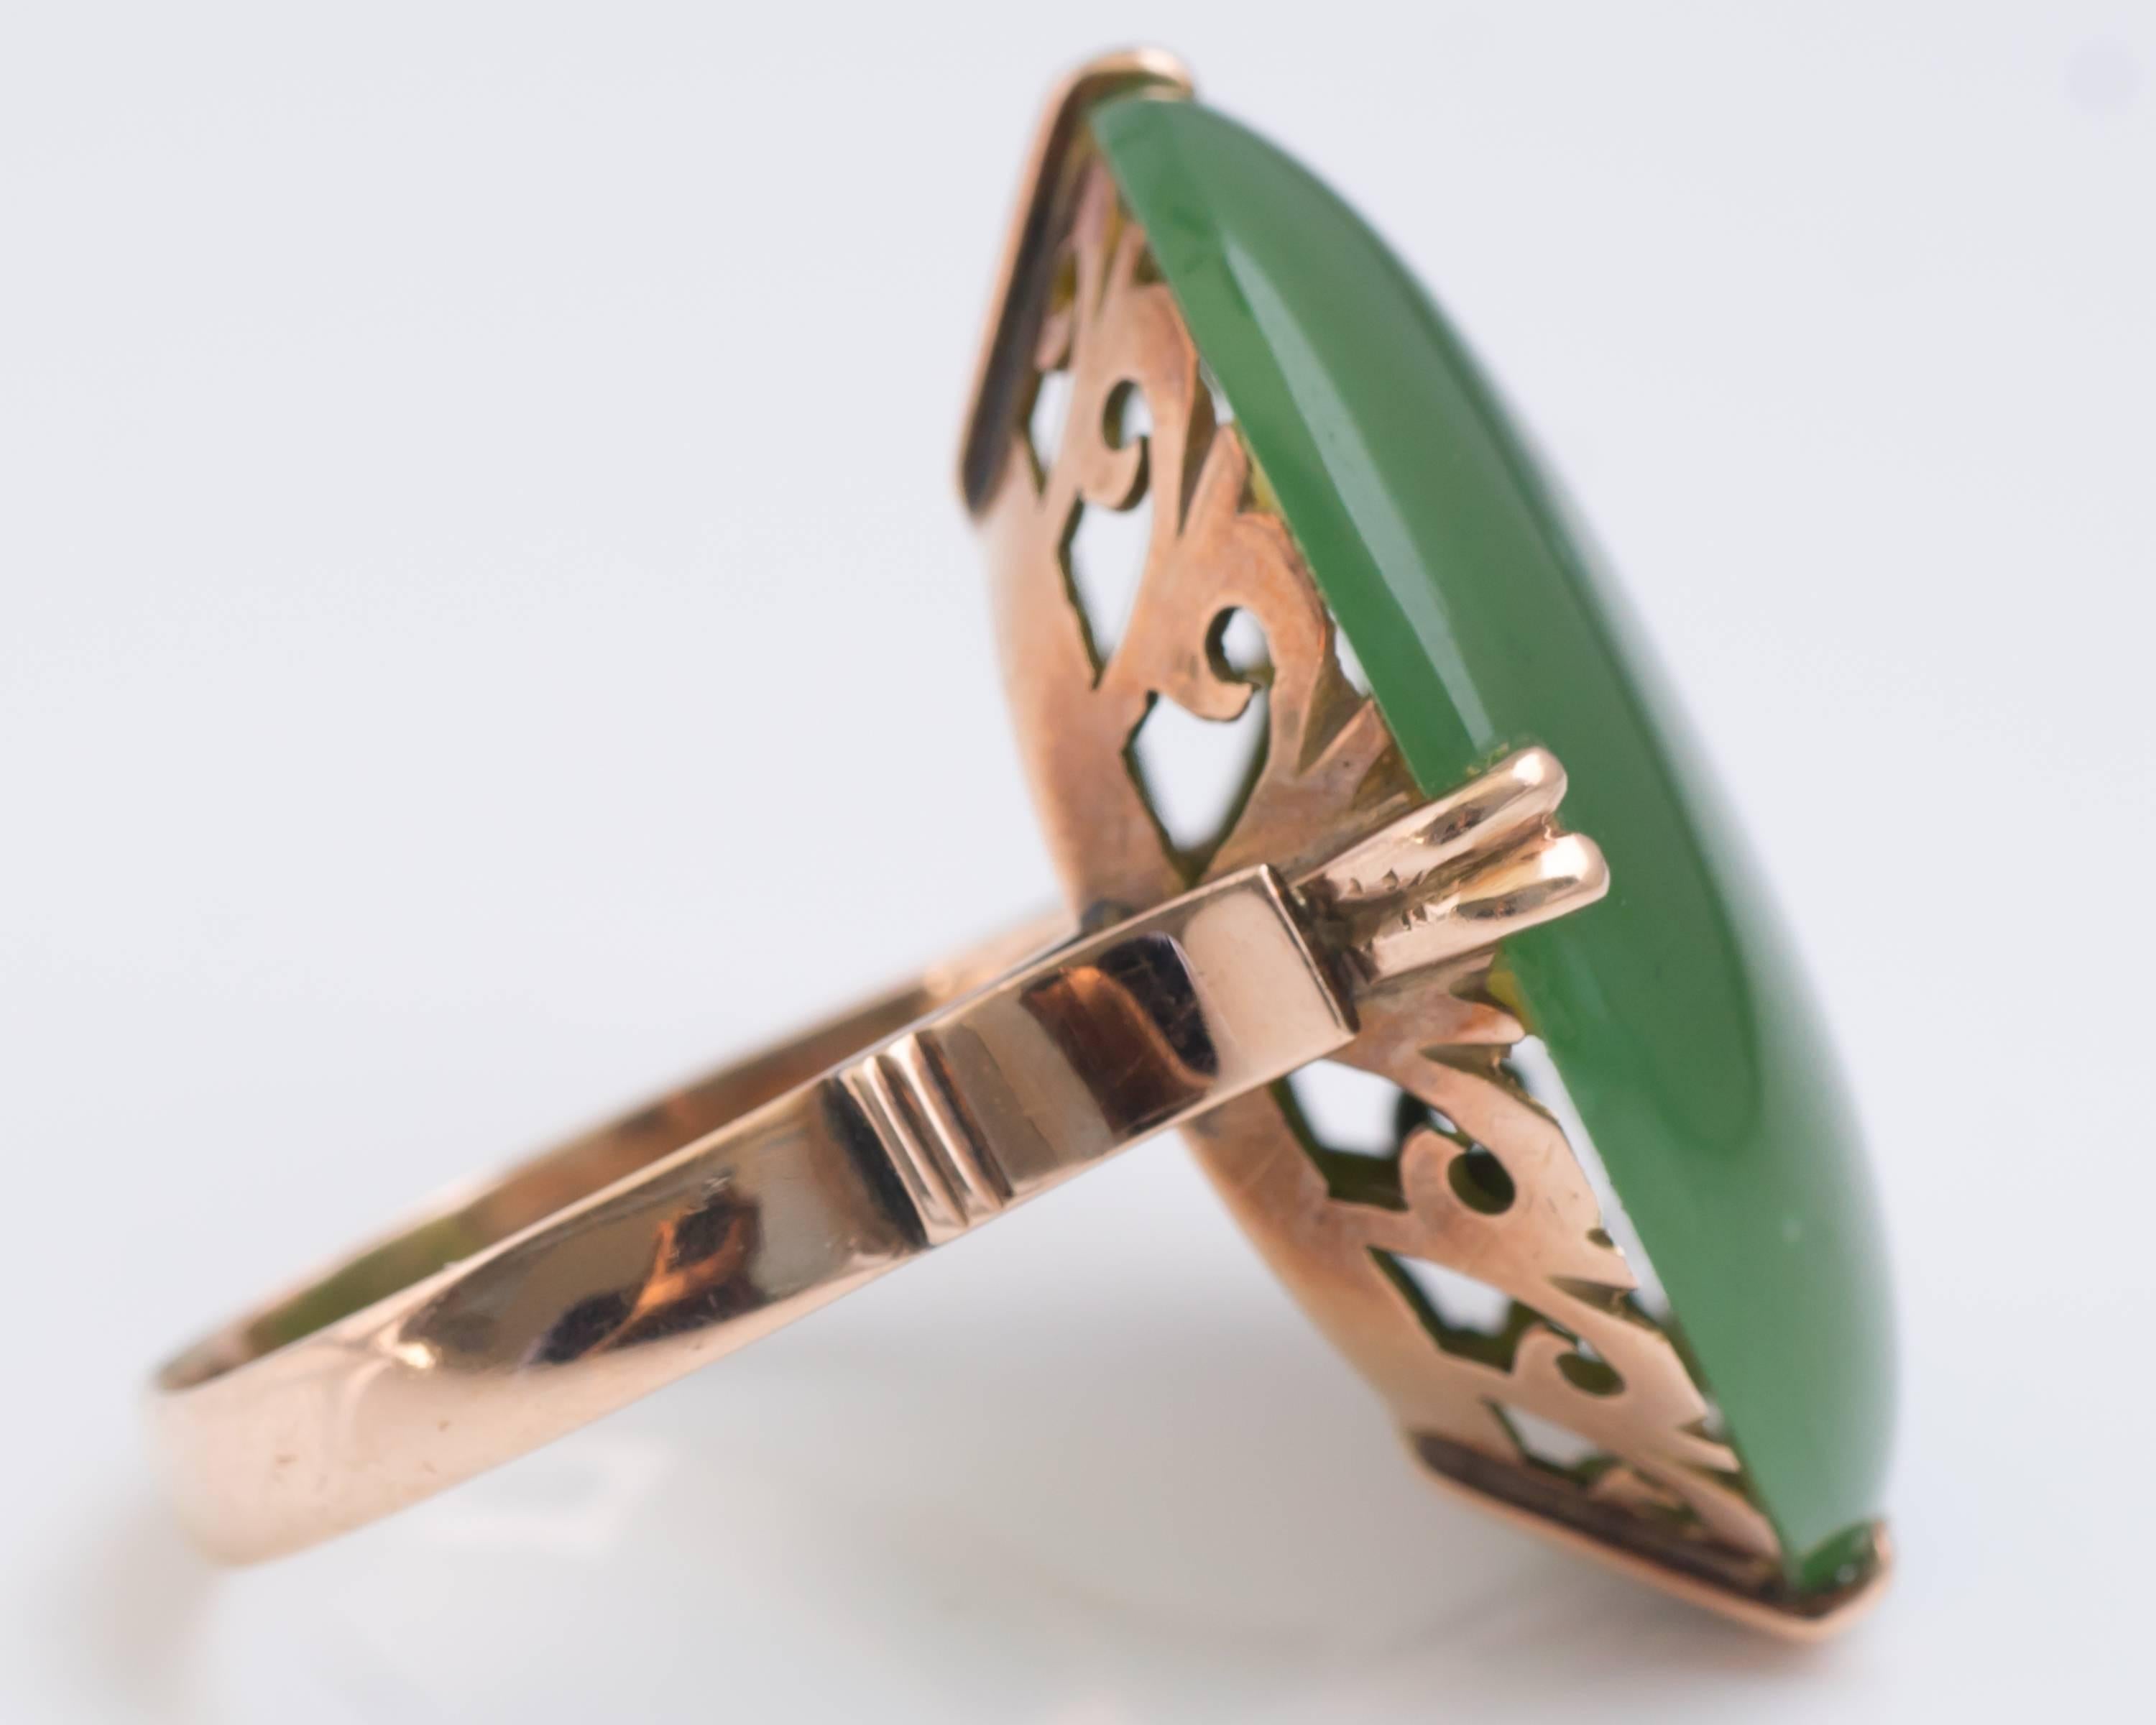 1890s Art Nouveau 18 Karat Rose Gold & Oval Cabochon Nephrite Jade Ring

Features a 7 carat Jade cabochon in an ornate 18 Carat Rose Gold setting. The Nephrite Jade is securely set with 4 double claw prongs. The Jade Cabochon is an excellent deep